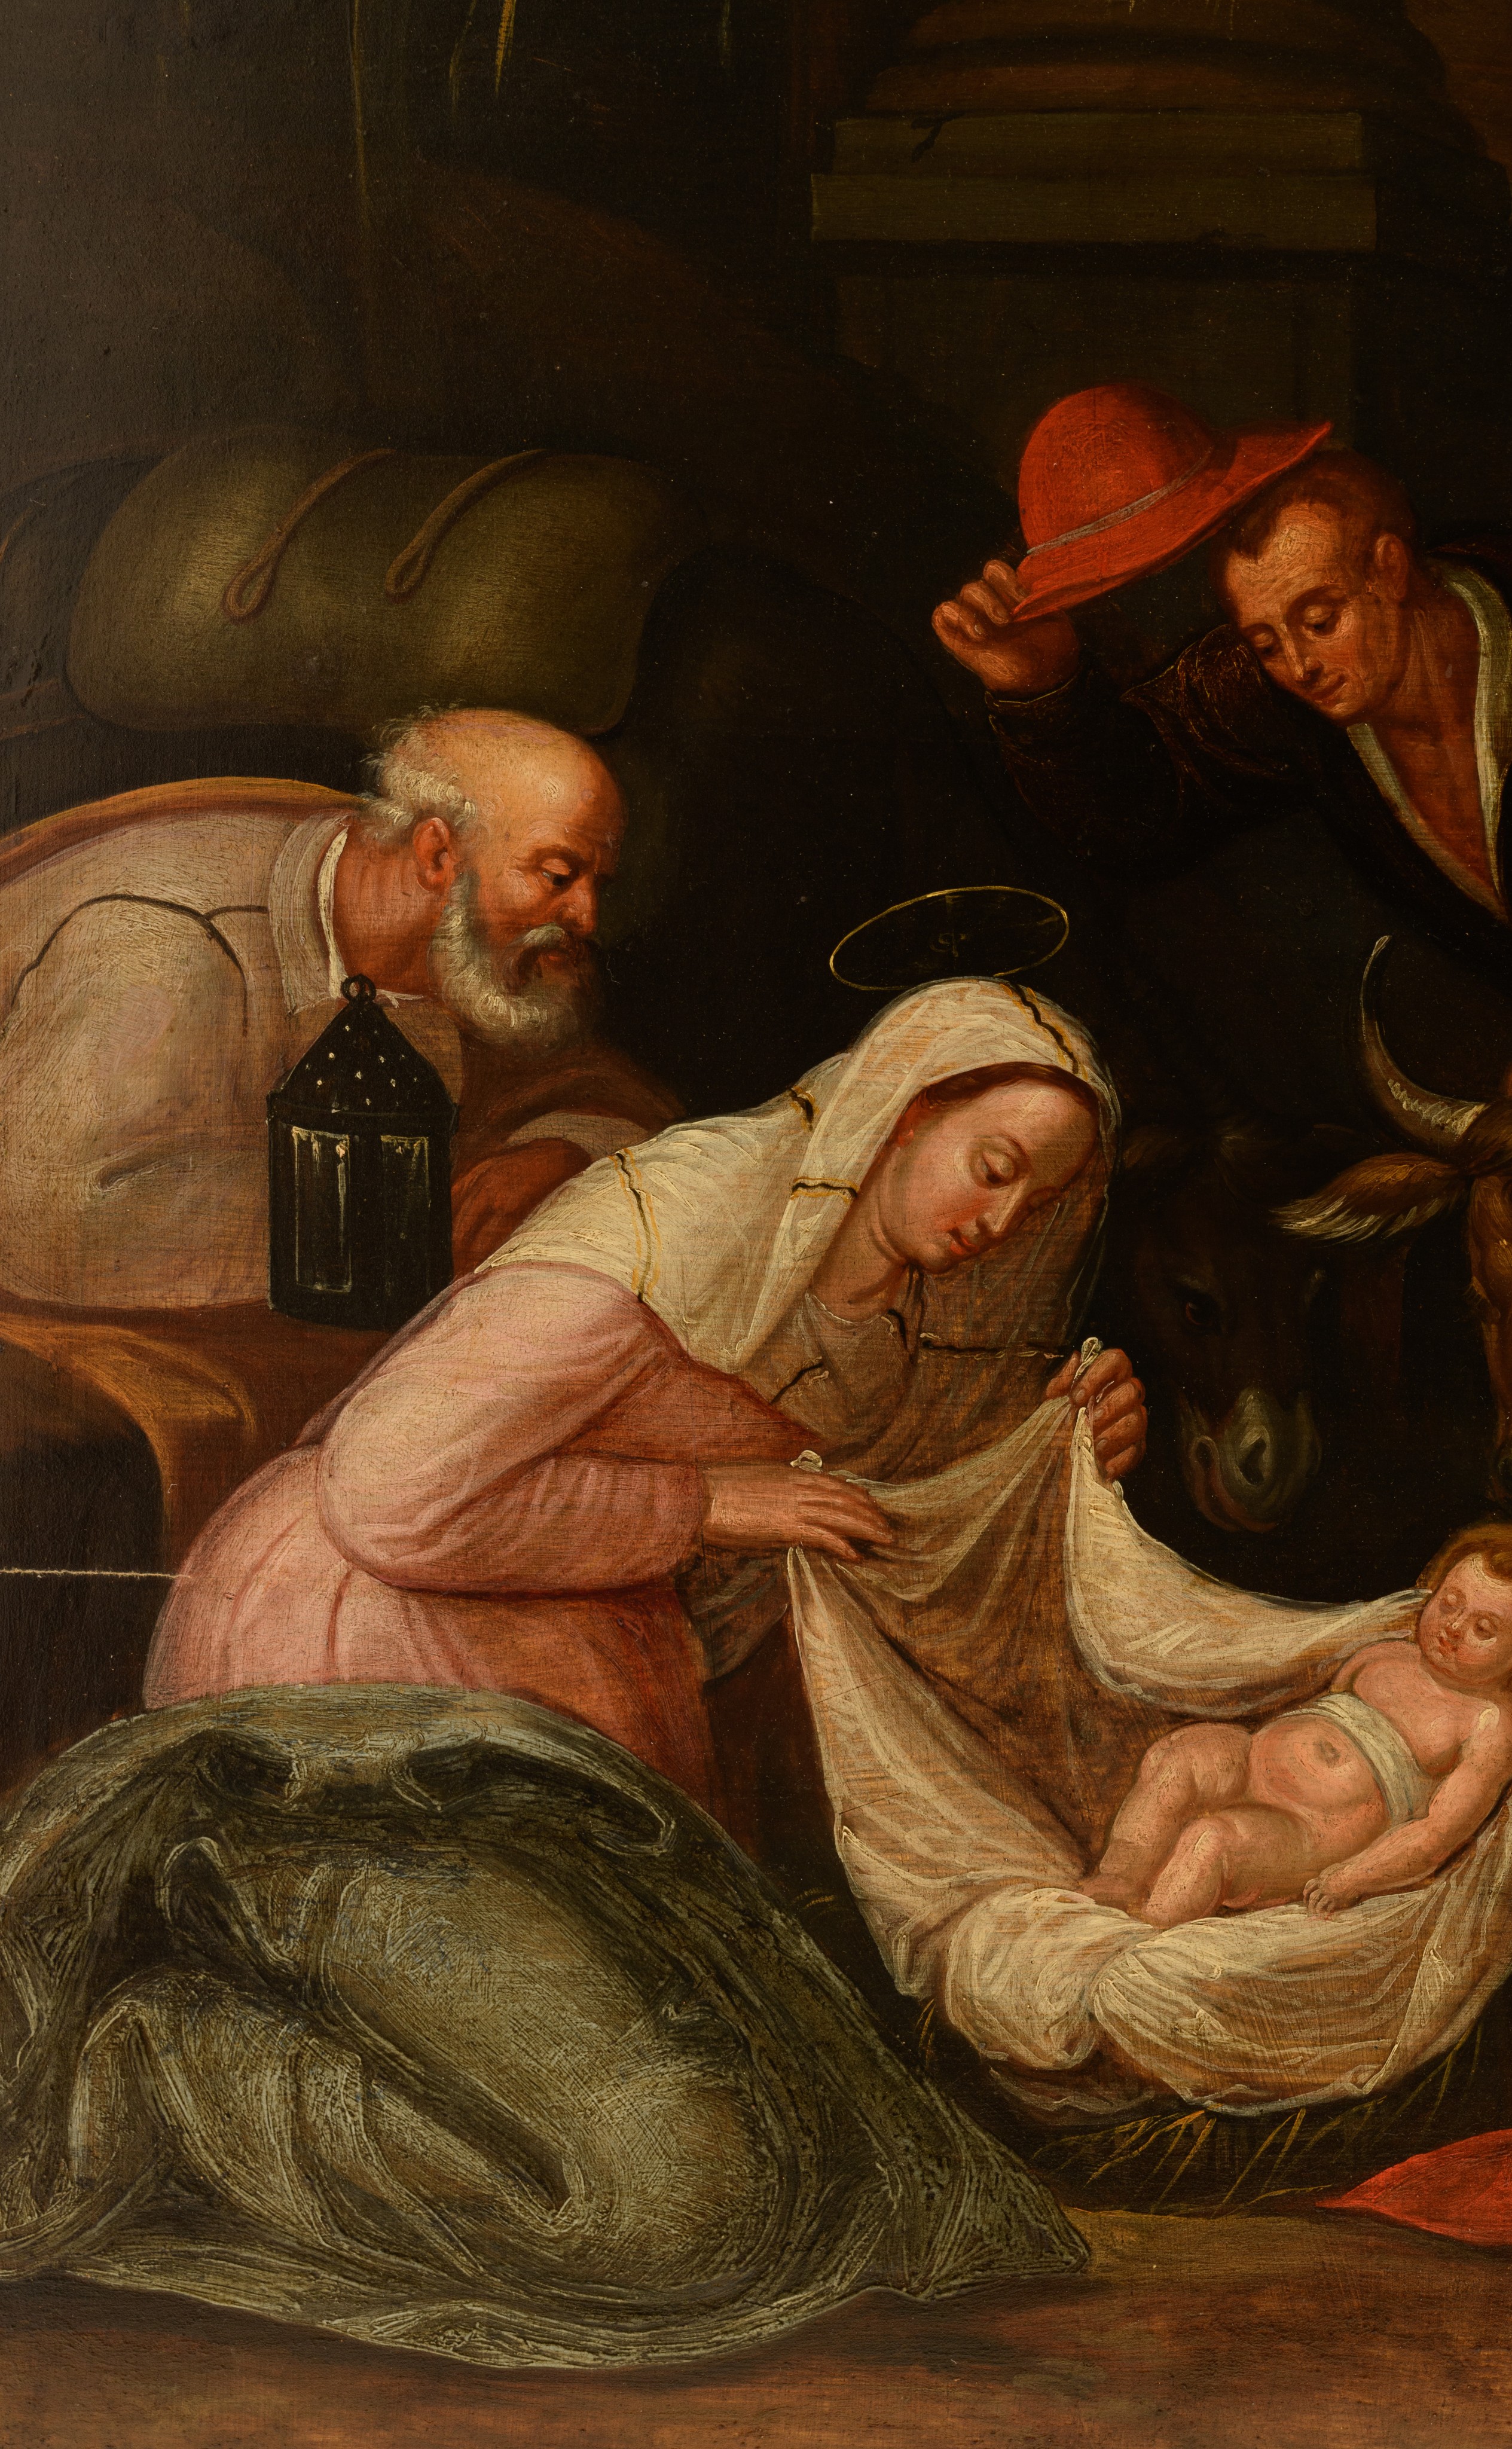 The adoration of the shepherds, late Antwerp Mannerism, 17thC, oil on panel, 74 x 105 cm - Image 8 of 8